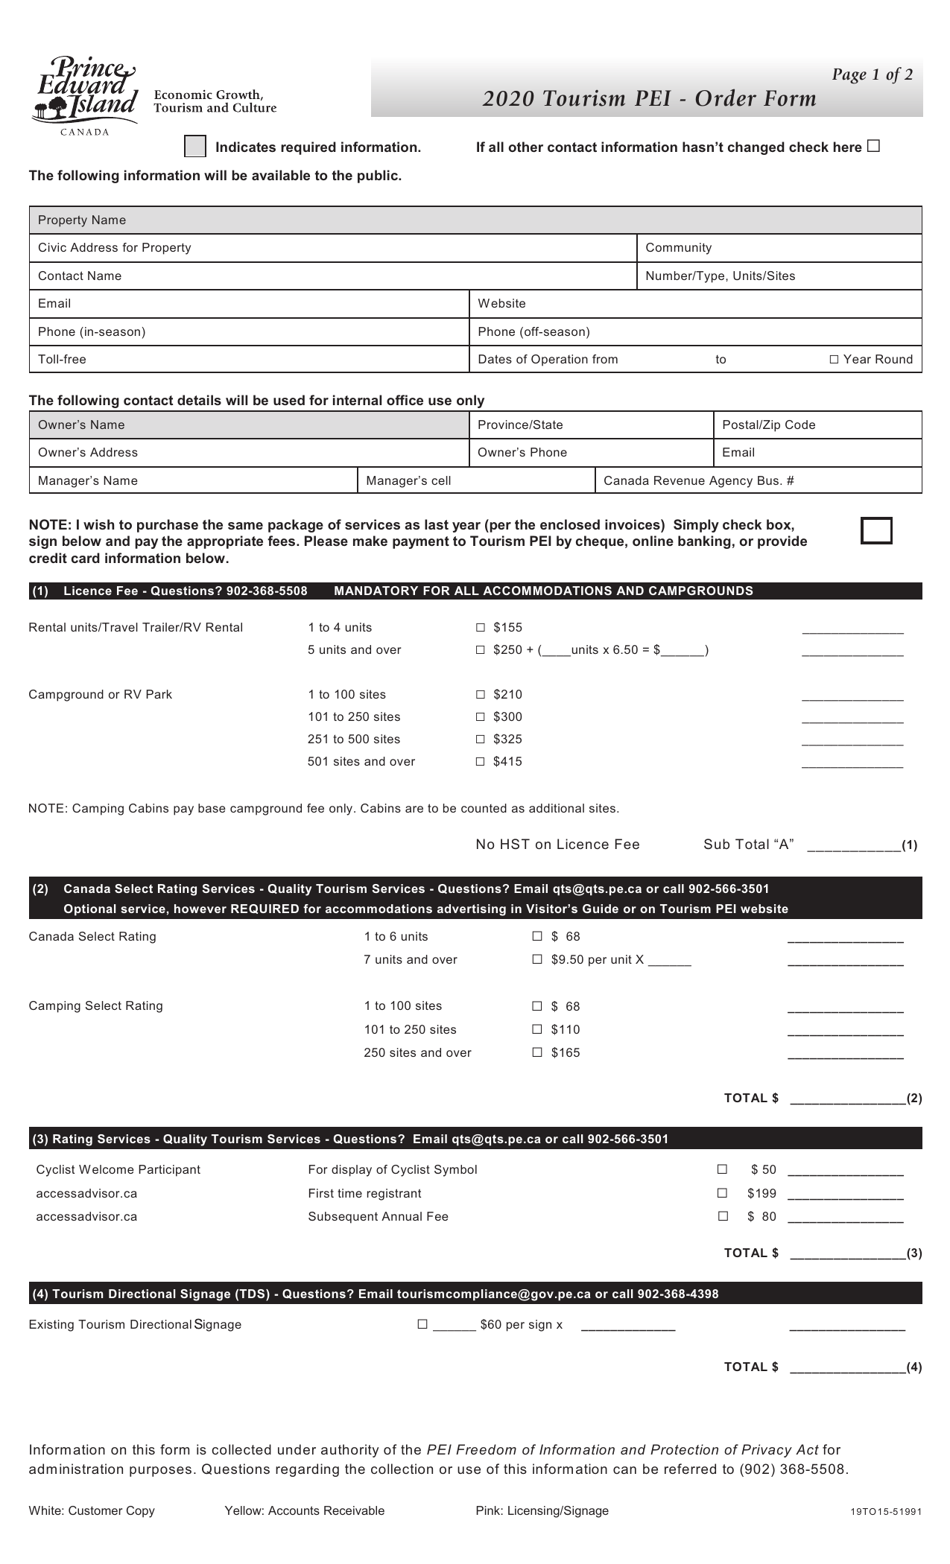 Form 19TO15-51991 Tourism Pei - Order Form - Prince Edward Island, Canada, Page 1